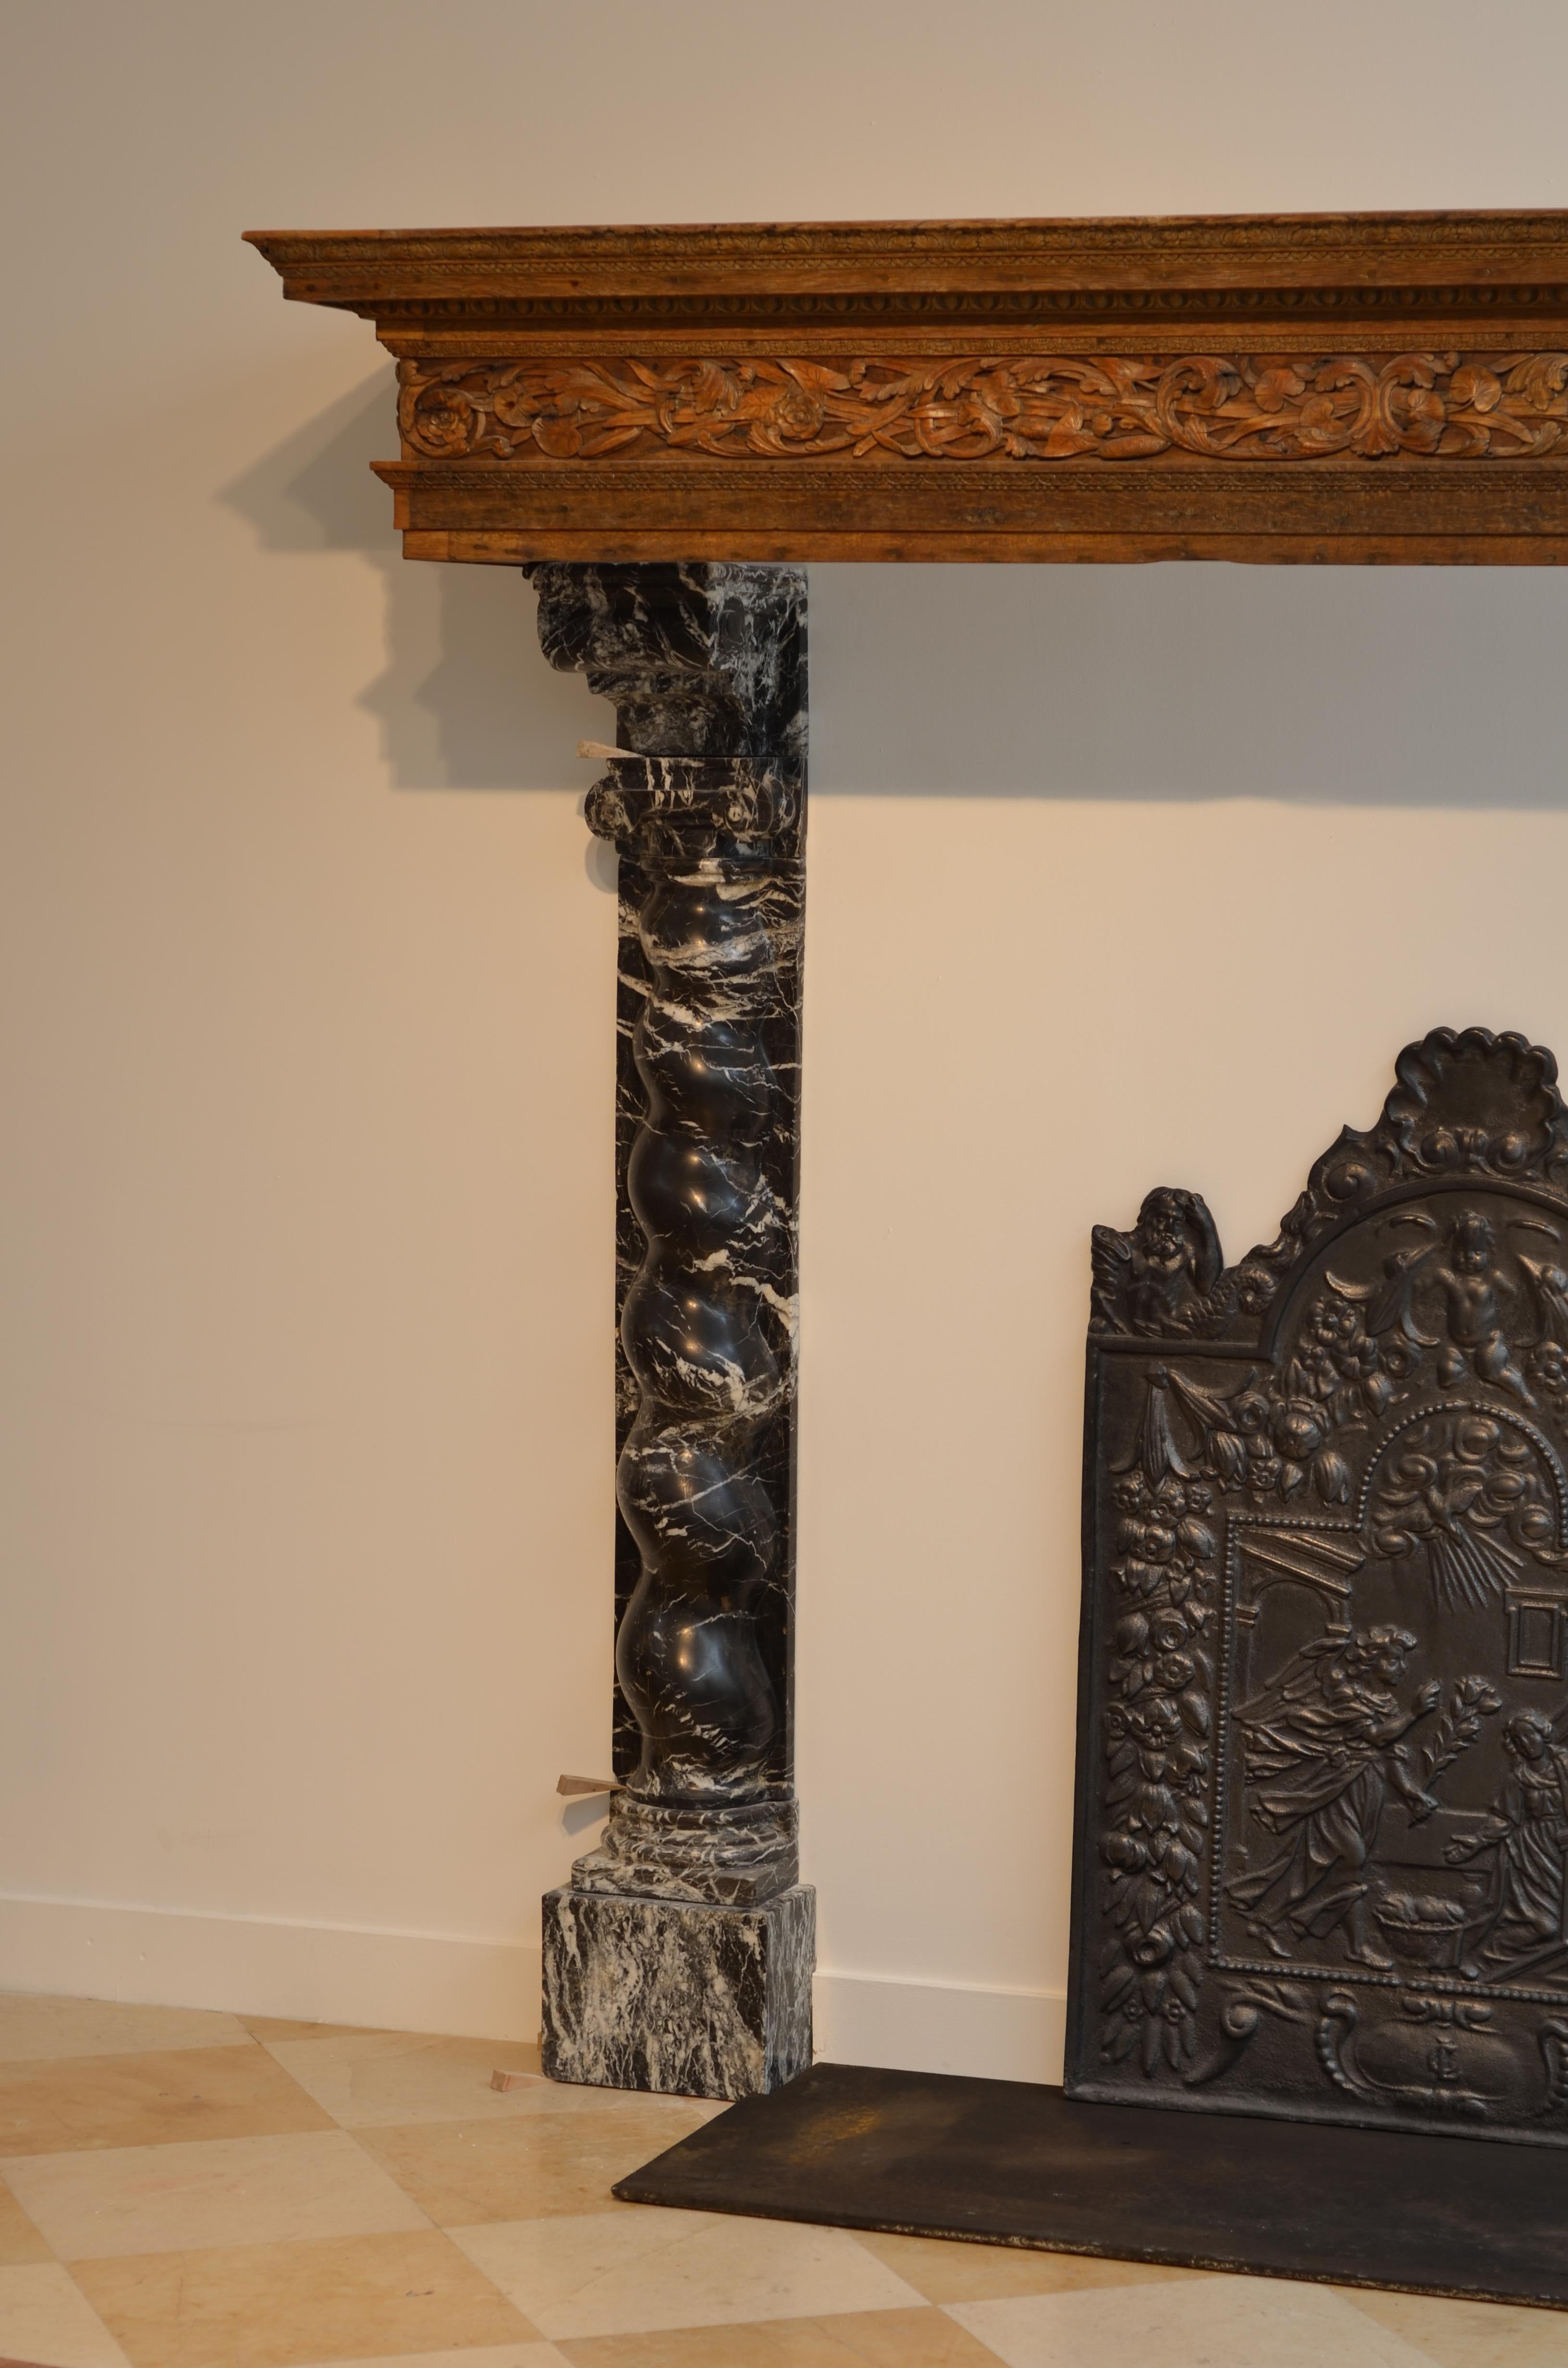 Unique 17th Century Baroque Dutch Fireplace In Good Condition For Sale In Haarlem, Noord-Holland